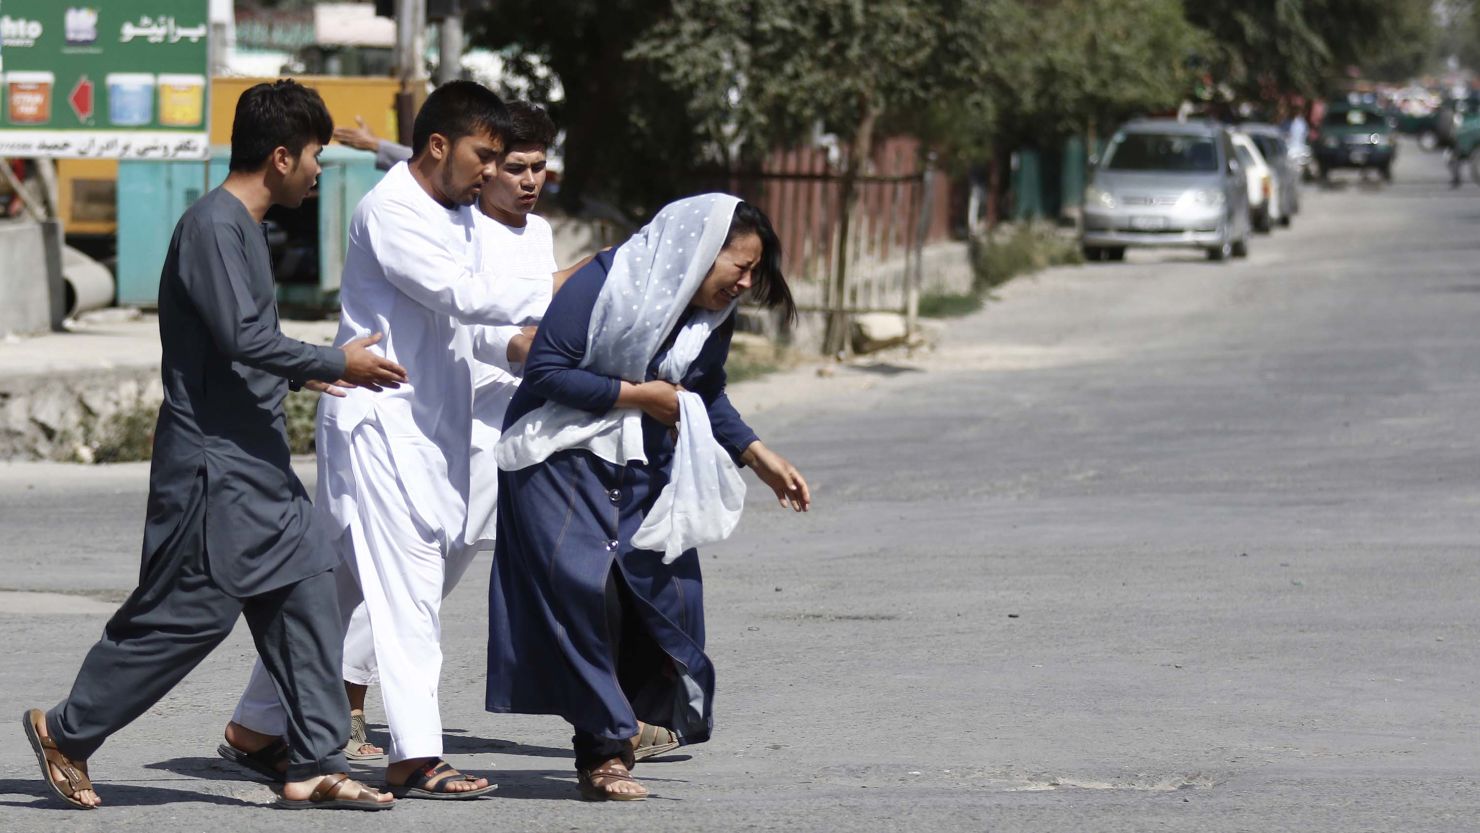 Afghans flee the site of an attack on a Shiite Muslim mosque in Kabul during Friday prayers.